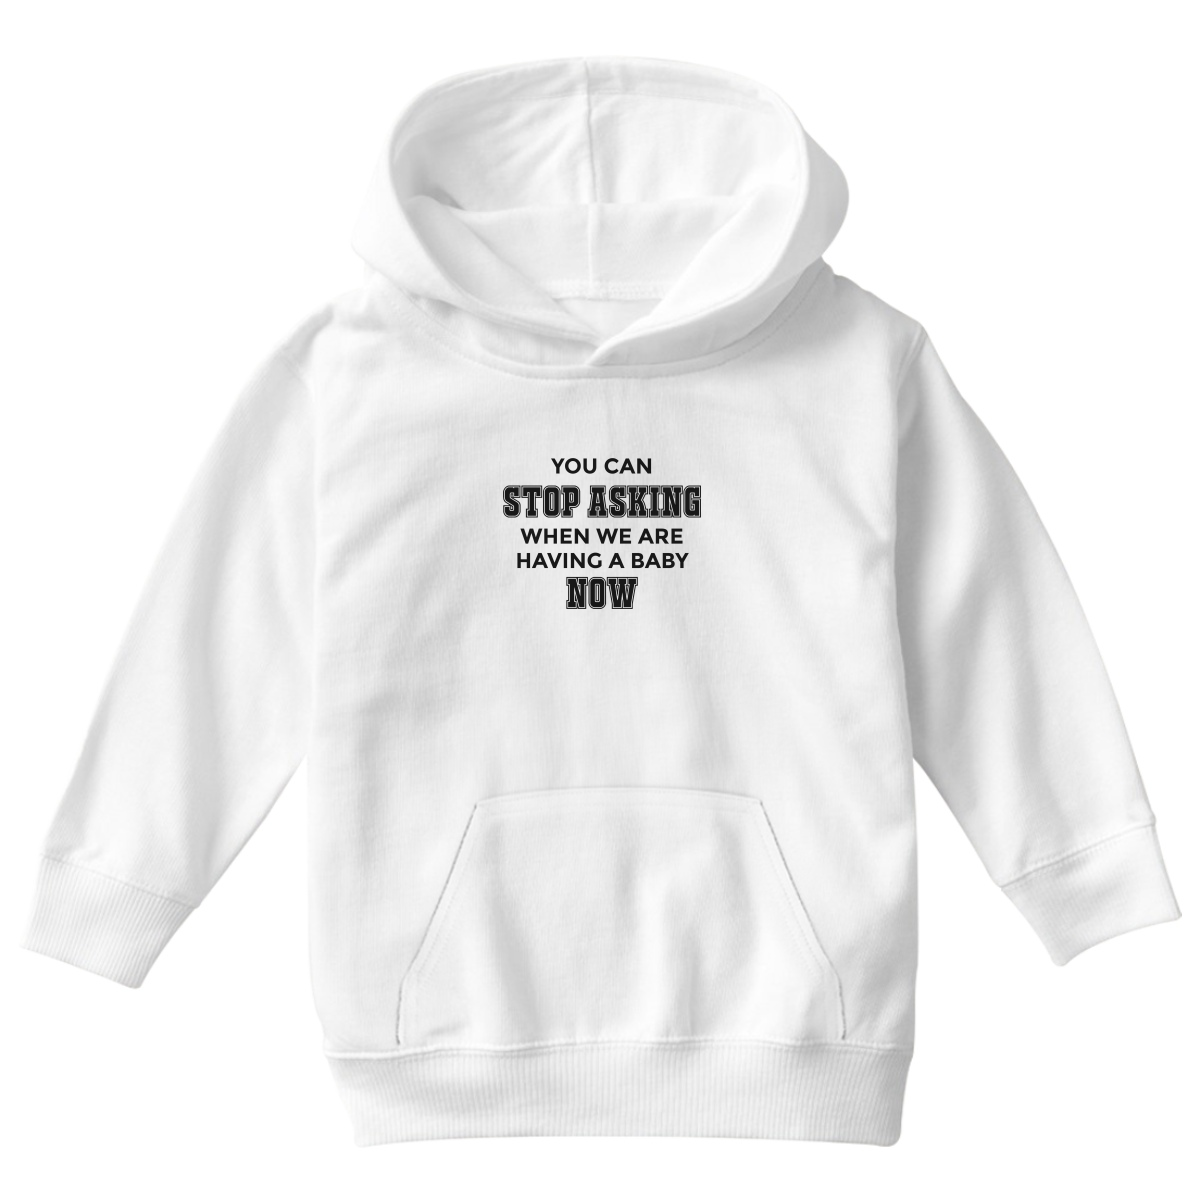 You can stop asking when we are having baby NOW Kids Hoodie | White